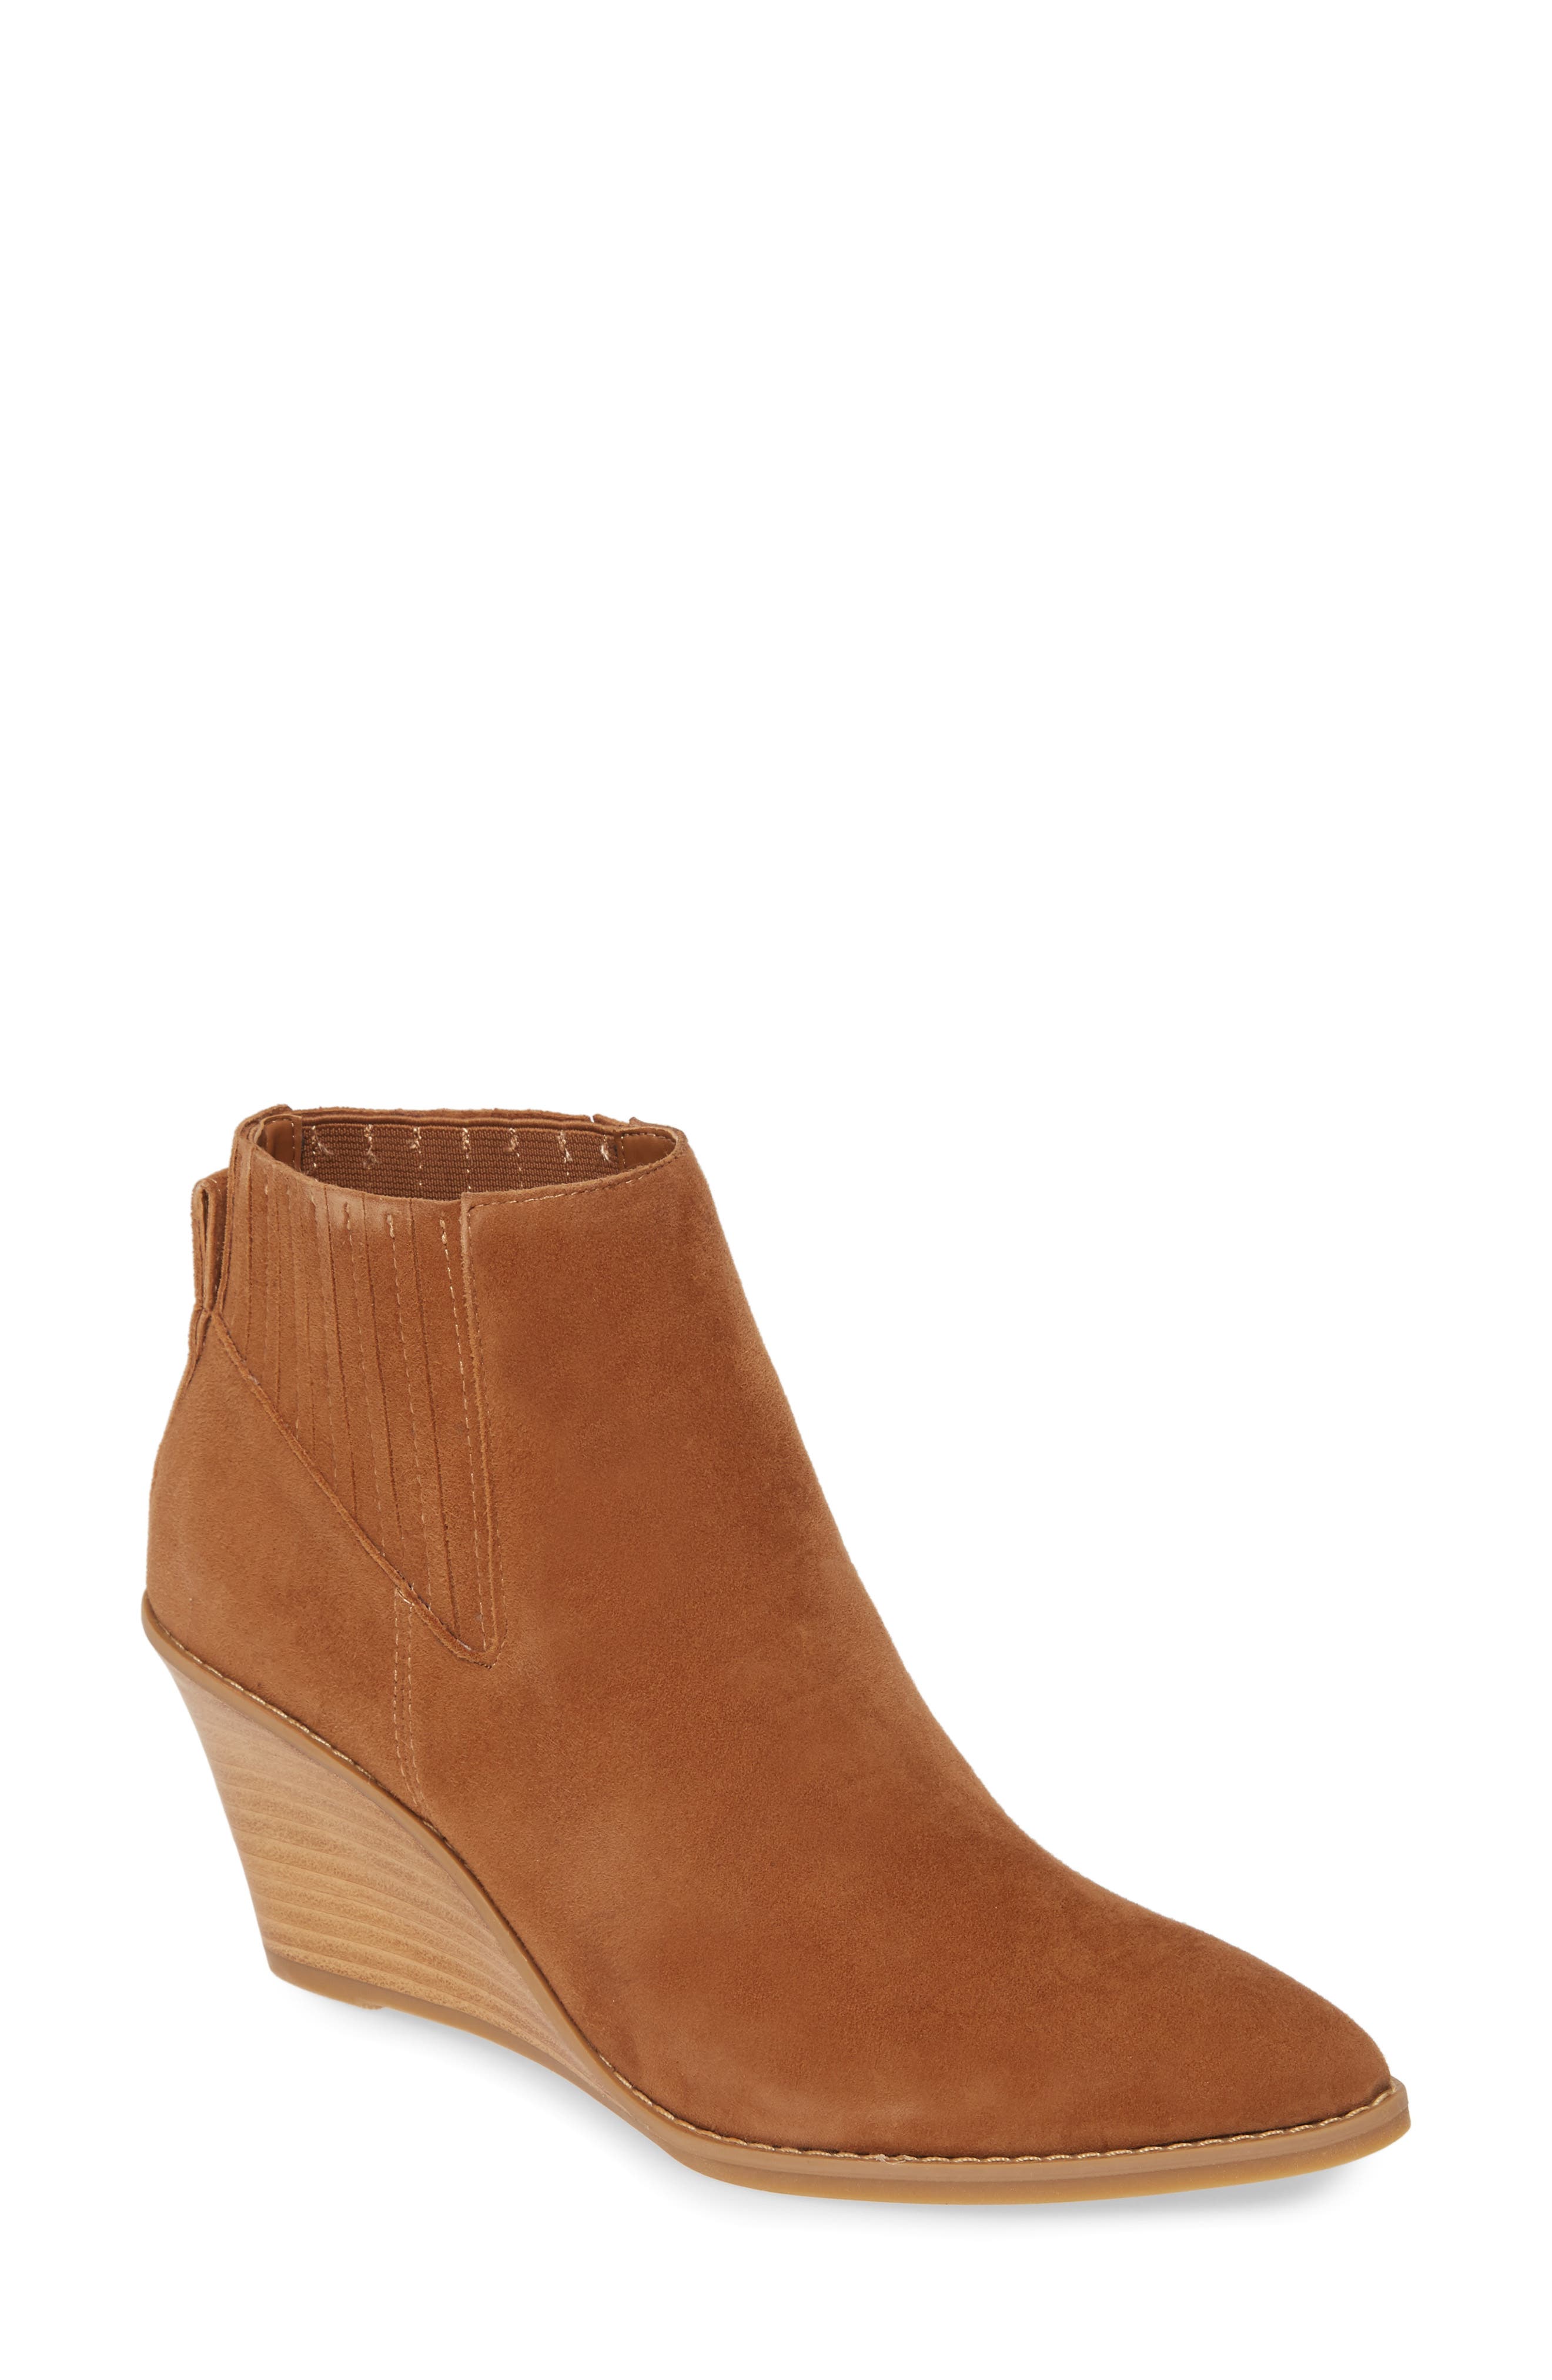 UPC 192675902786 product image for Women's Calvin Klein Tabby Wedge Bootie, Size 8.5 M - Brown | upcitemdb.com